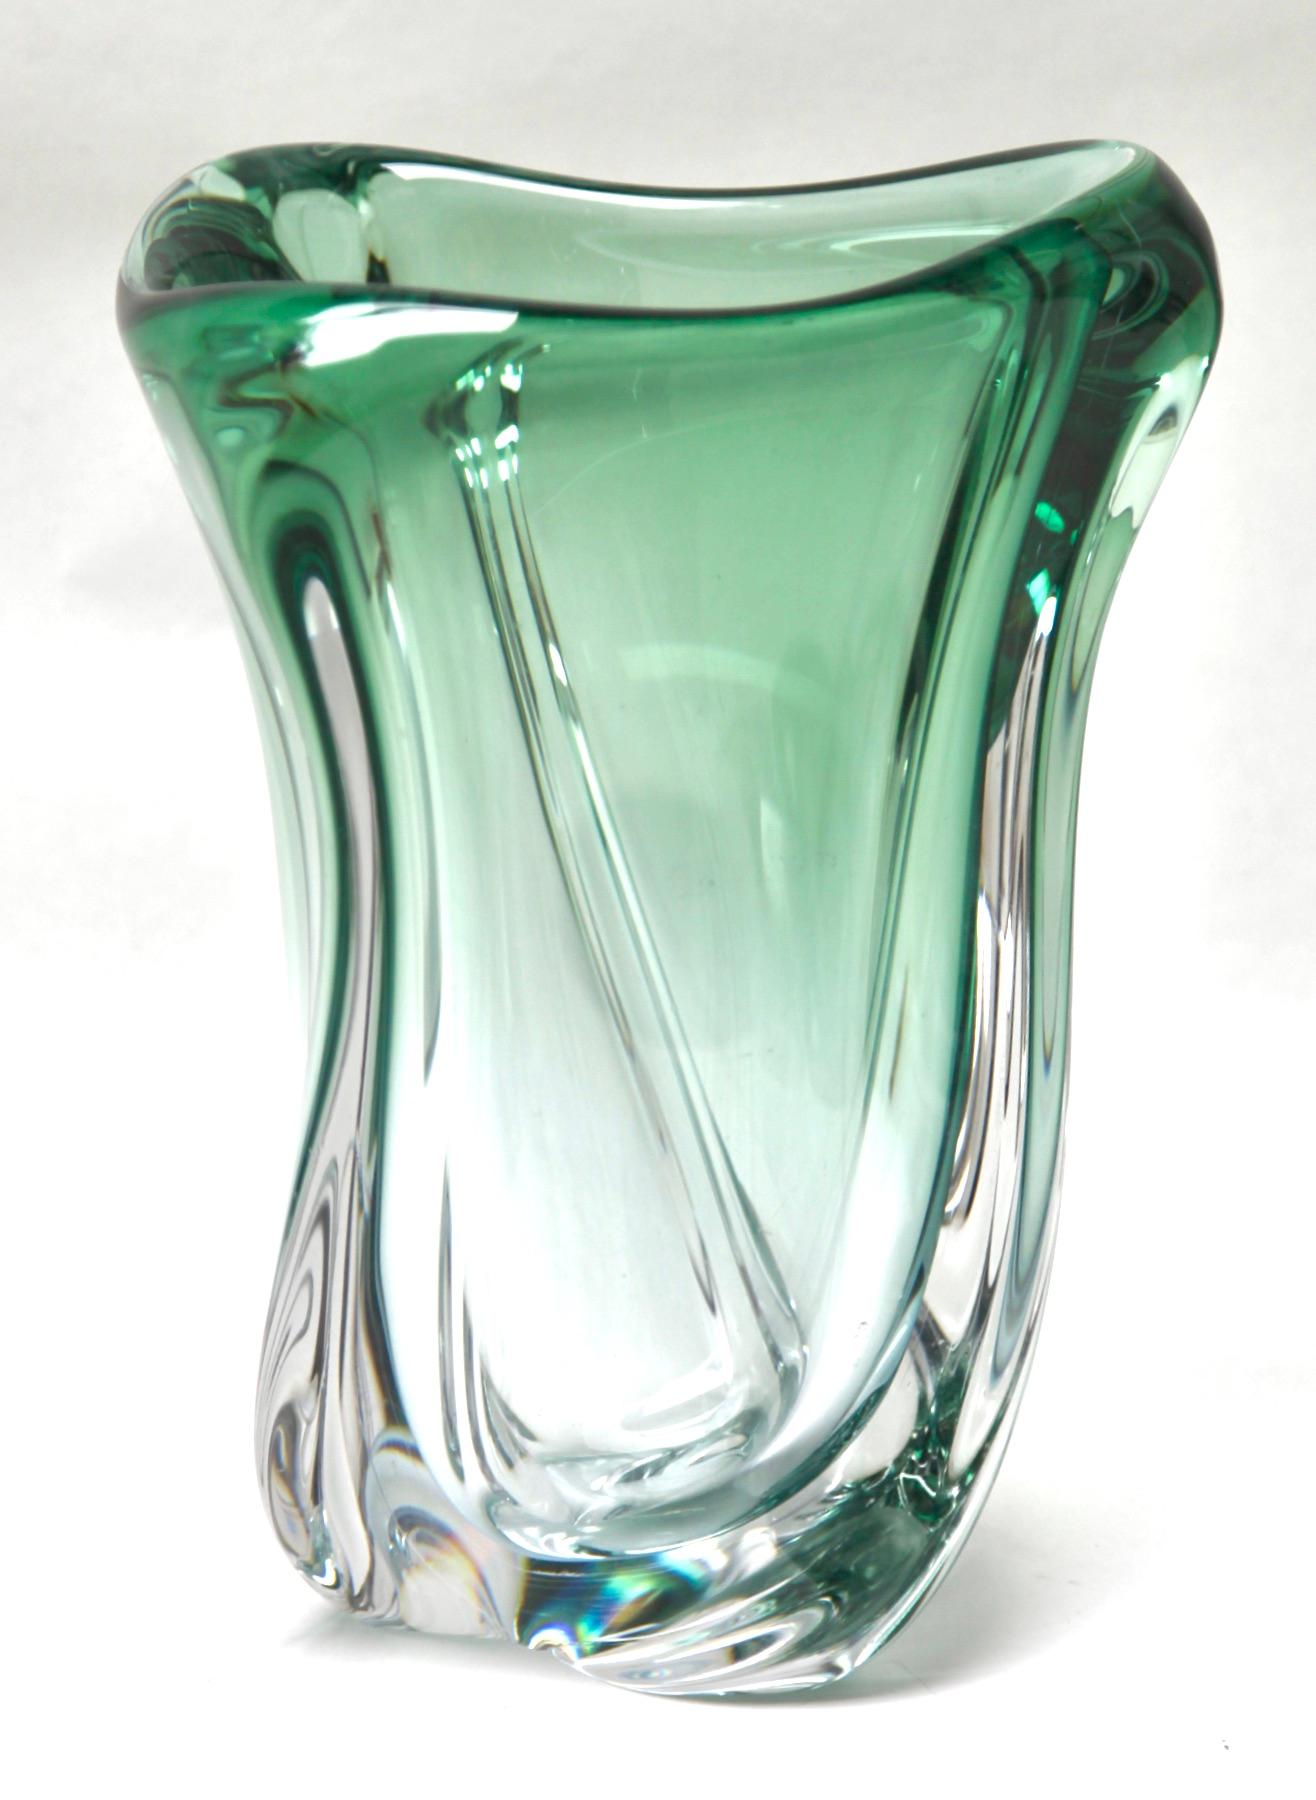 Heavy Val Saint Lambert crystal vase.
The central Green color (a traditional favorite for VSL) has been given a thick Sommerso (clear layer on the outside) and sculpted with subtle curves by the master craftsmen at Belgium's top factory.
A result is